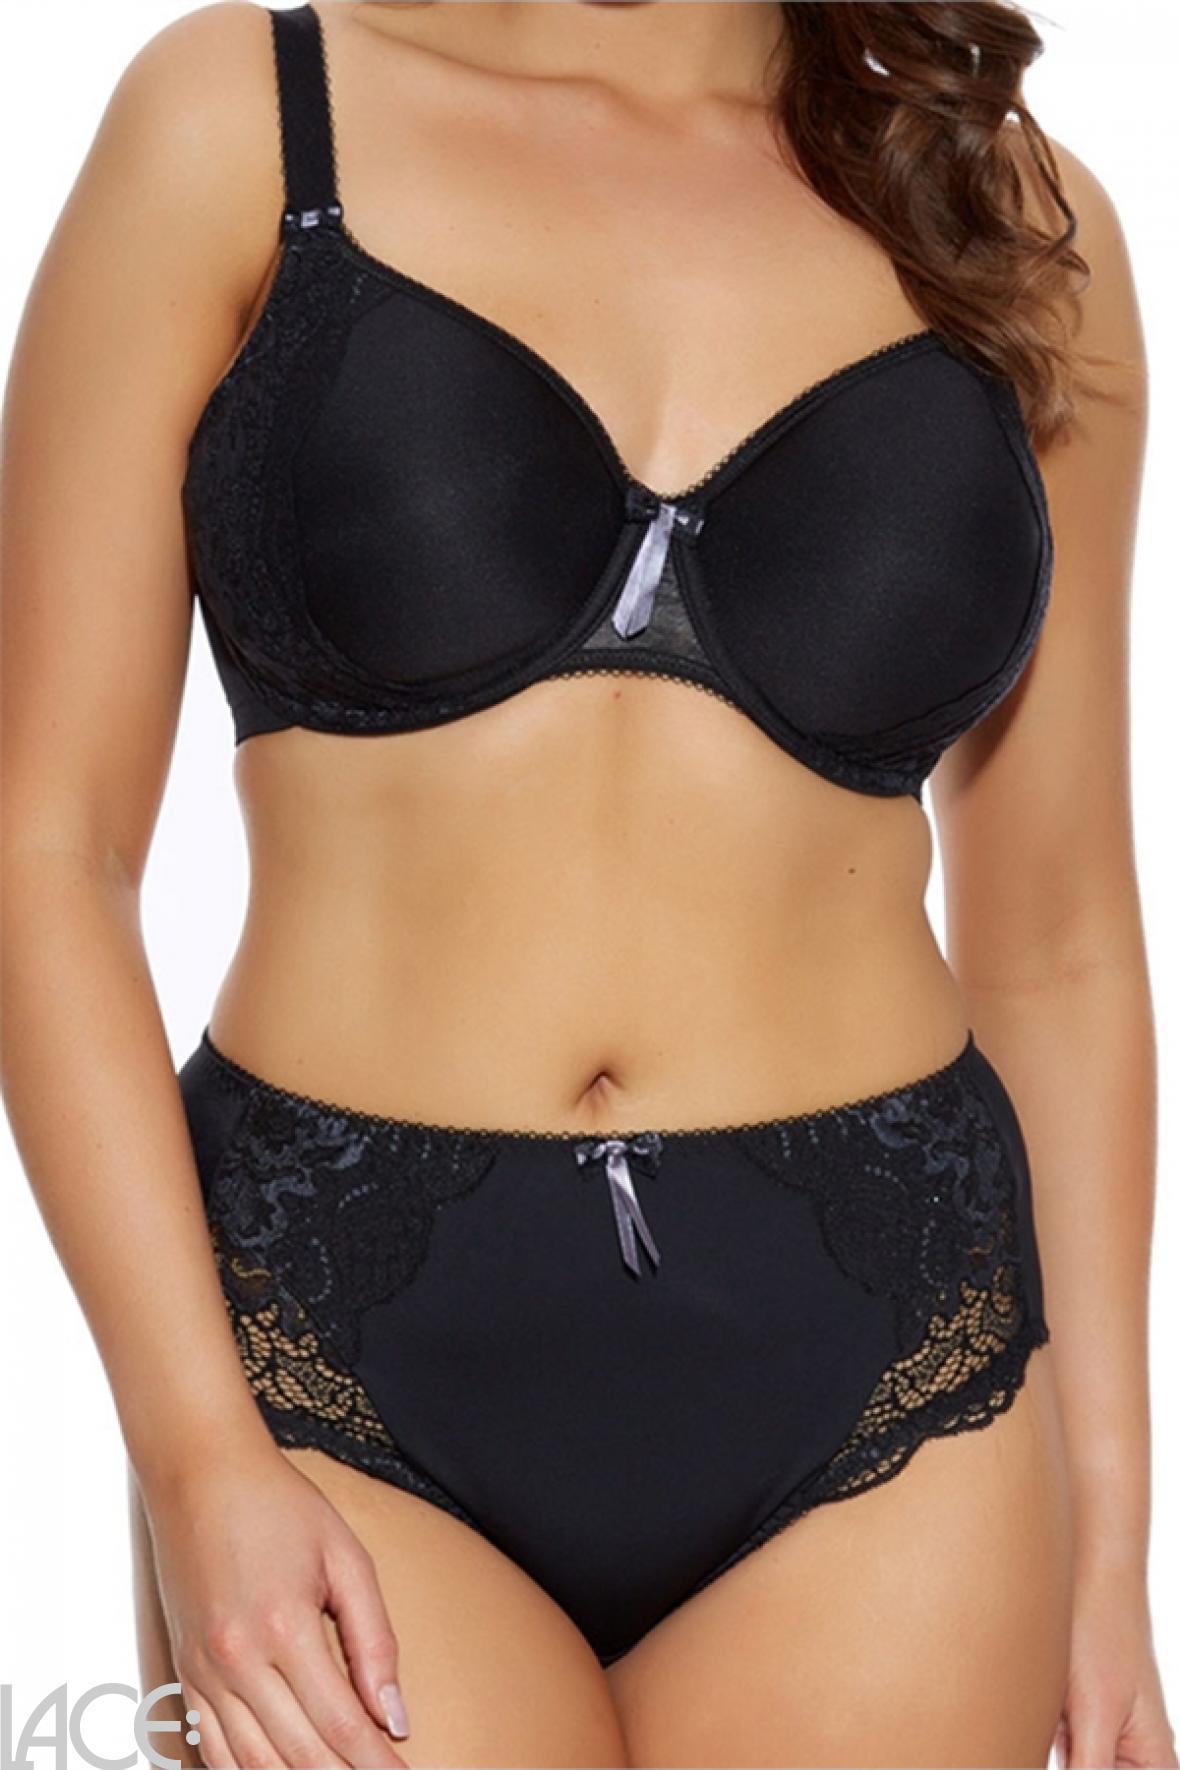 Elomi Amelia Black Full Figure Molded Underwire Lace Bra 36L 36 New nwt Size  undefined - $33 New With Tags - From Jenny